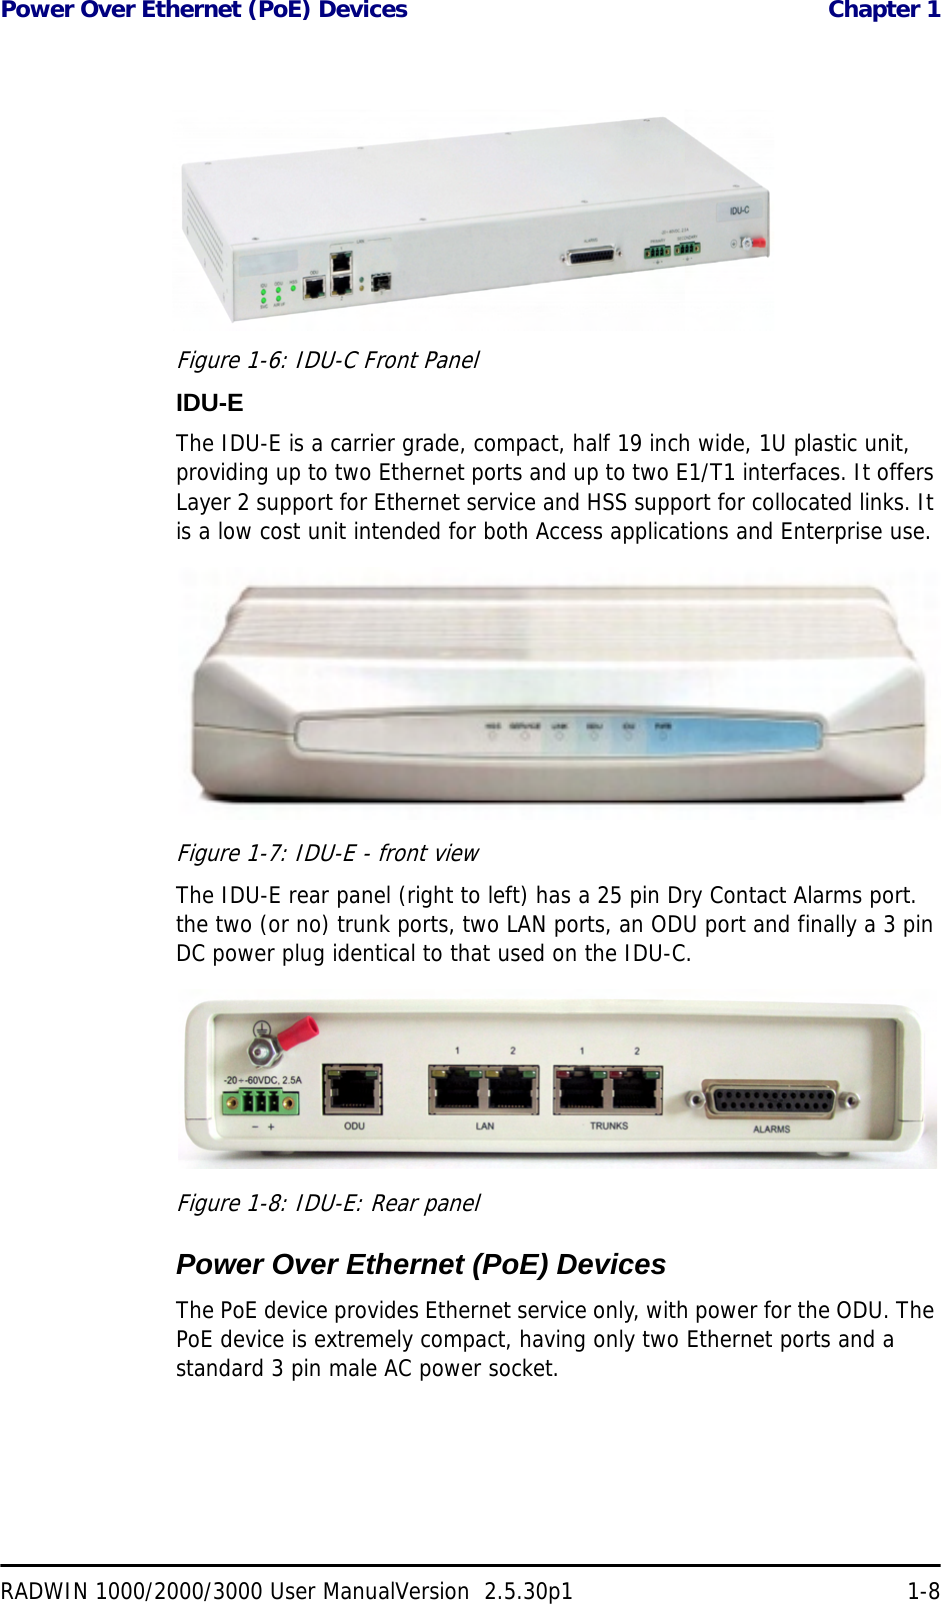 Power Over Ethernet (PoE) Devices  Chapter 1RADWIN 1000/2000/3000 User ManualVersion  2.5.30p1 1-8Figure 1-6: IDU-C Front PanelIDU-EThe IDU-E is a carrier grade, compact, half 19 inch wide, 1U plastic unit, providing up to two Ethernet ports and up to two E1/T1 interfaces. It offers Layer 2 support for Ethernet service and HSS support for collocated links. It is a low cost unit intended for both Access applications and Enterprise use.Figure 1-7: IDU-E - front viewThe IDU-E rear panel (right to left) has a 25 pin Dry Contact Alarms port. the two (or no) trunk ports, two LAN ports, an ODU port and finally a 3 pin DC power plug identical to that used on the IDU-C.Figure 1-8: IDU-E: Rear panelPower Over Ethernet (PoE) DevicesThe PoE device provides Ethernet service only, with power for the ODU. The PoE device is extremely compact, having only two Ethernet ports and a standard 3 pin male AC power socket.